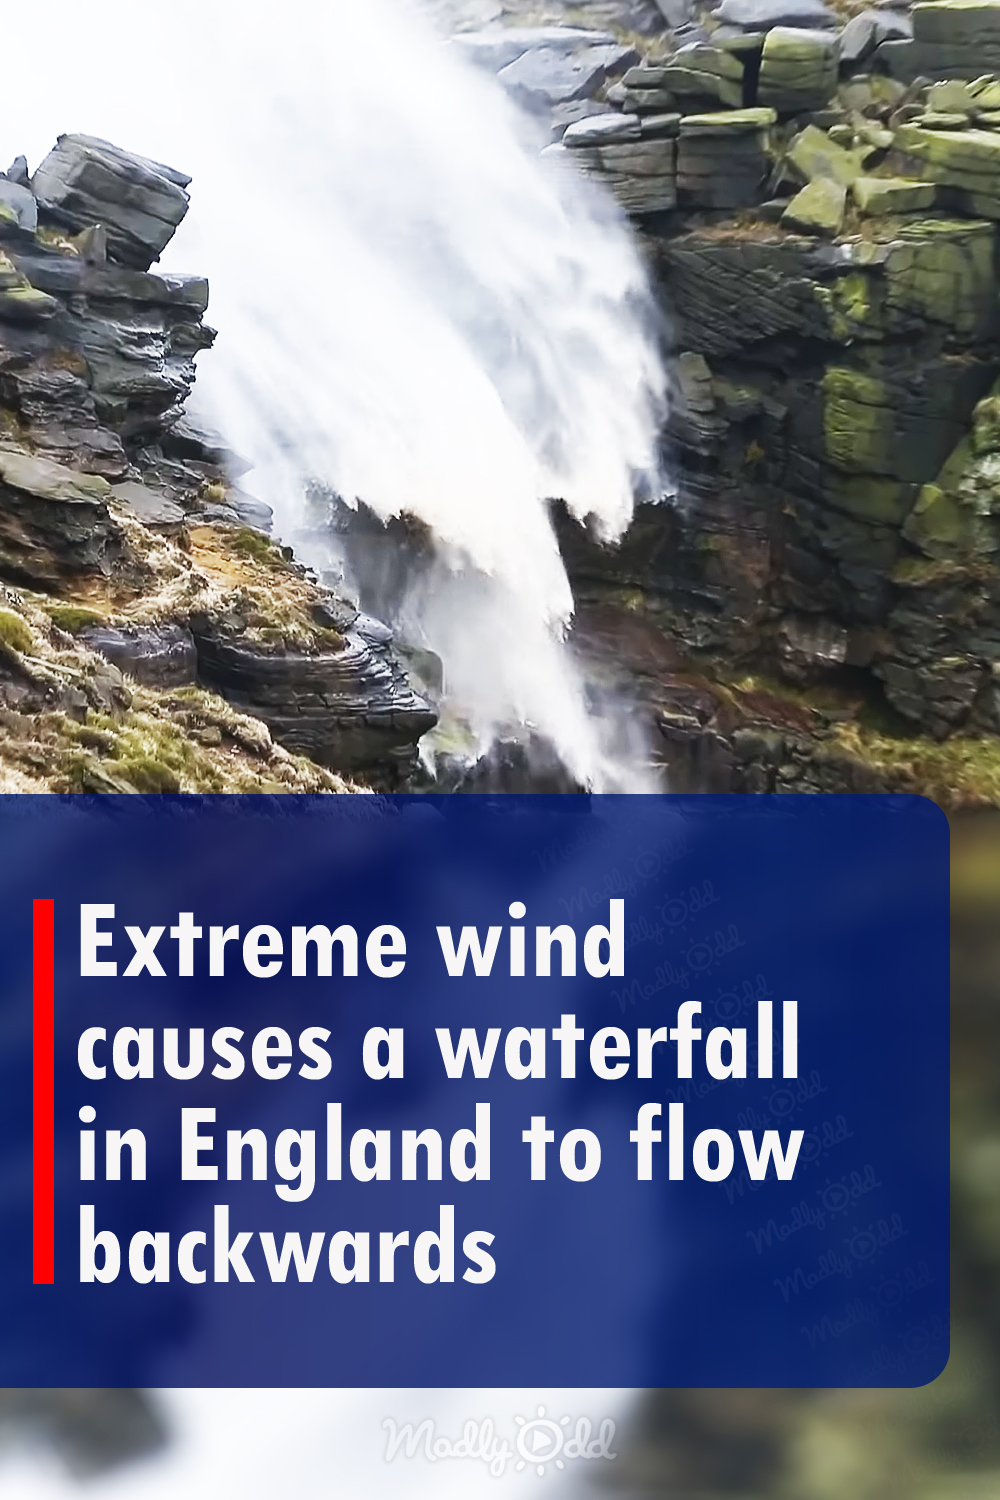 Extreme wind causes a waterfall in England to flow backwards